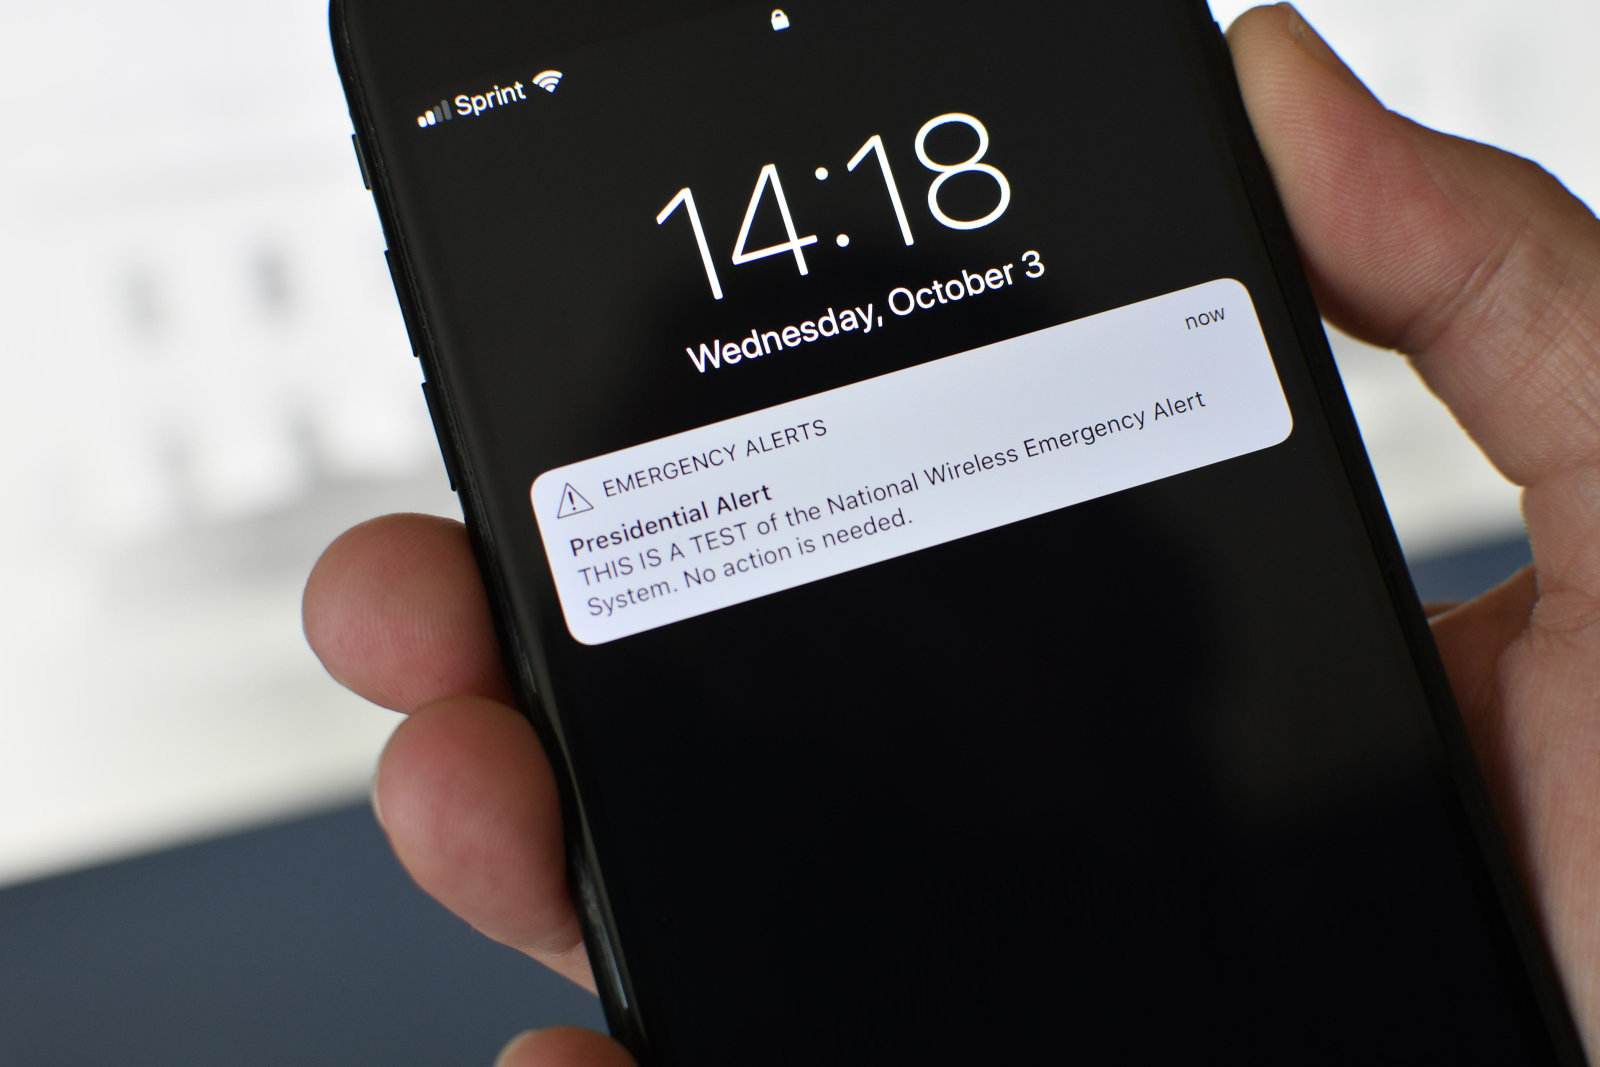 US Wireless Emergency Alerts Are Now Targeted More Locally – Daily News Insights